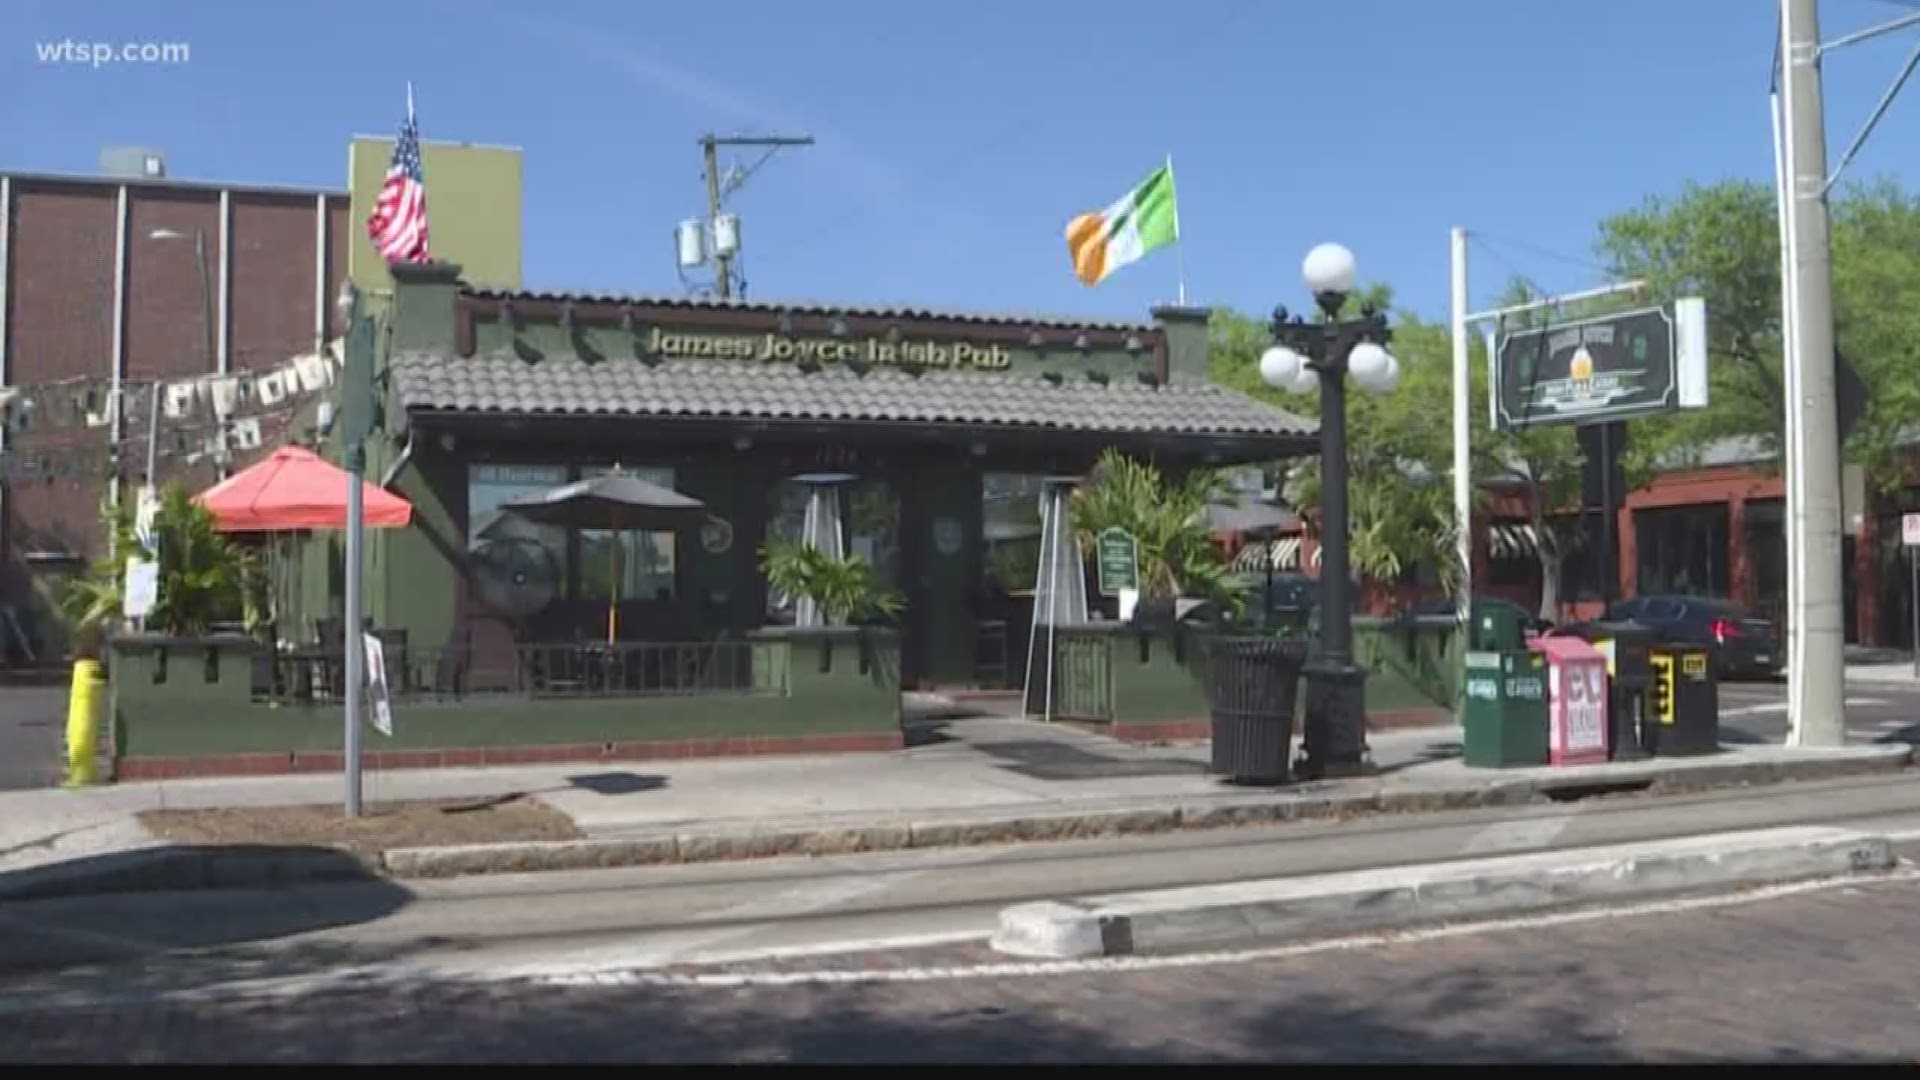 The James Joyce Irish Pub and Eatery had 26 health code violations, leading to a shutdown. The staff wouldn't let us in to check on its cleanup.